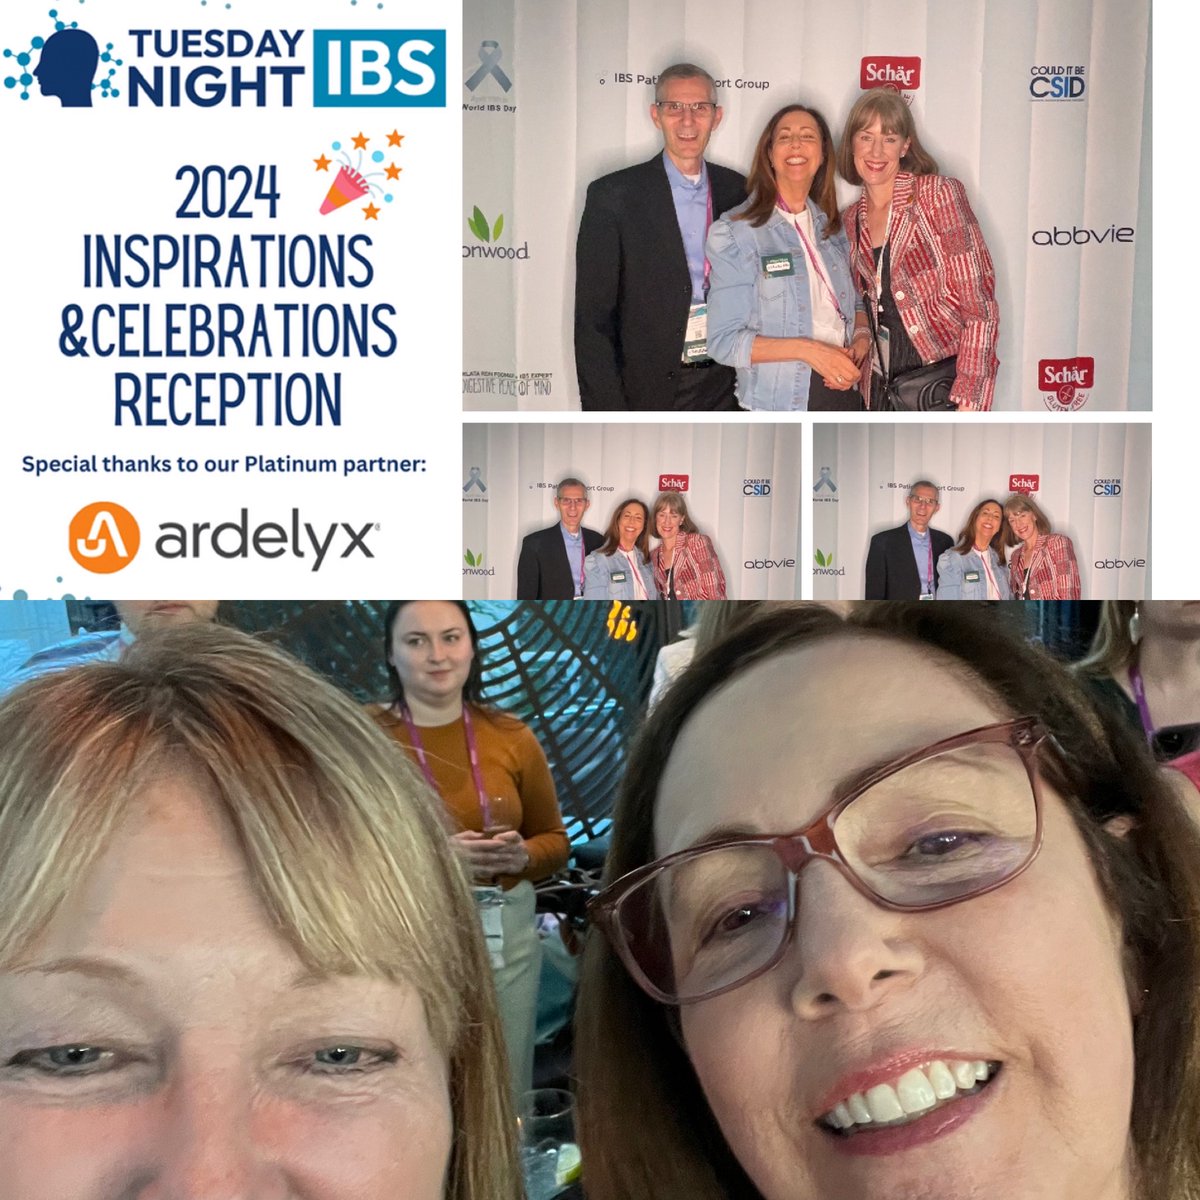 It was great to spend an evening with @TuesdayNightIBS's @IBSpatient @JohannahRuddy & @KateScarlata_RD, other patients and HCP’s. The #patientsvoice is so important and it's why we are all here. Thank you to all of the sponsors. Let's light up the world purple 🟣 next April